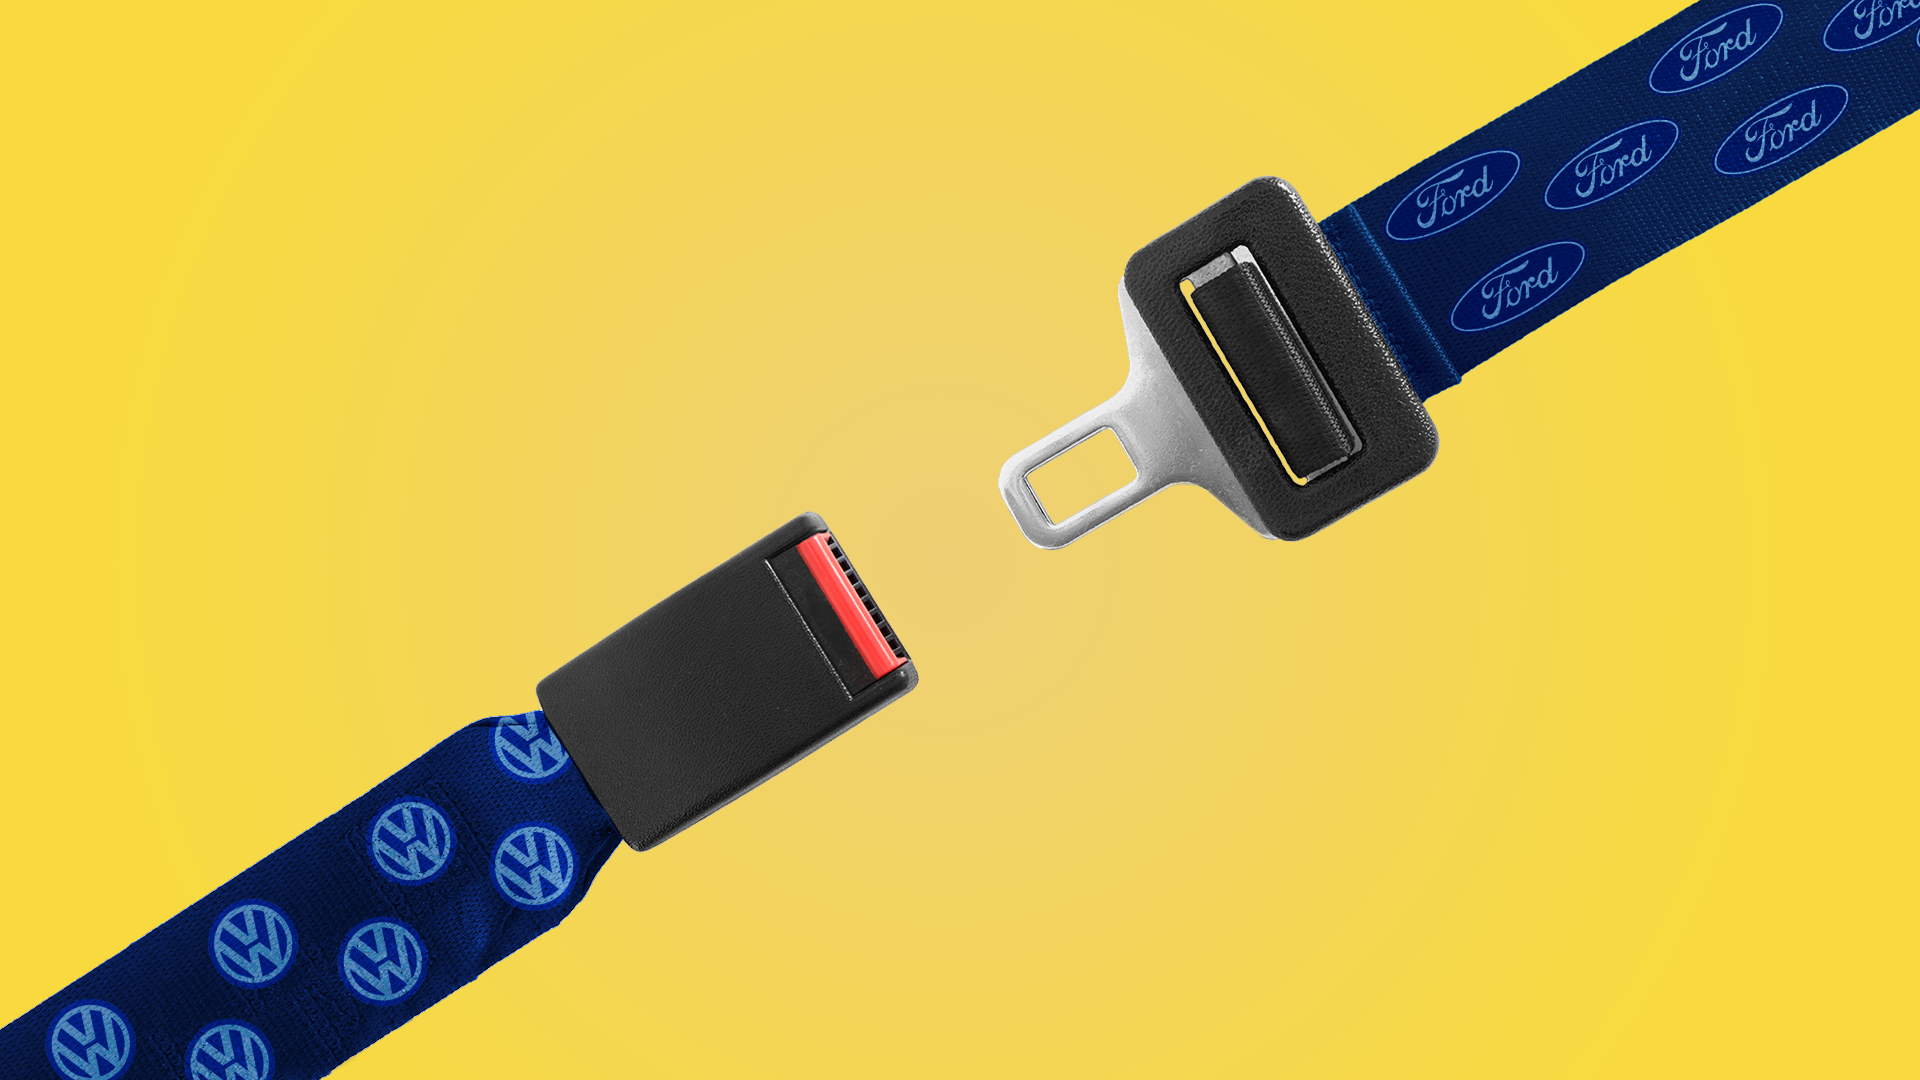 illustration of a seatbelt with embroidered Ford and Volkswagen logos